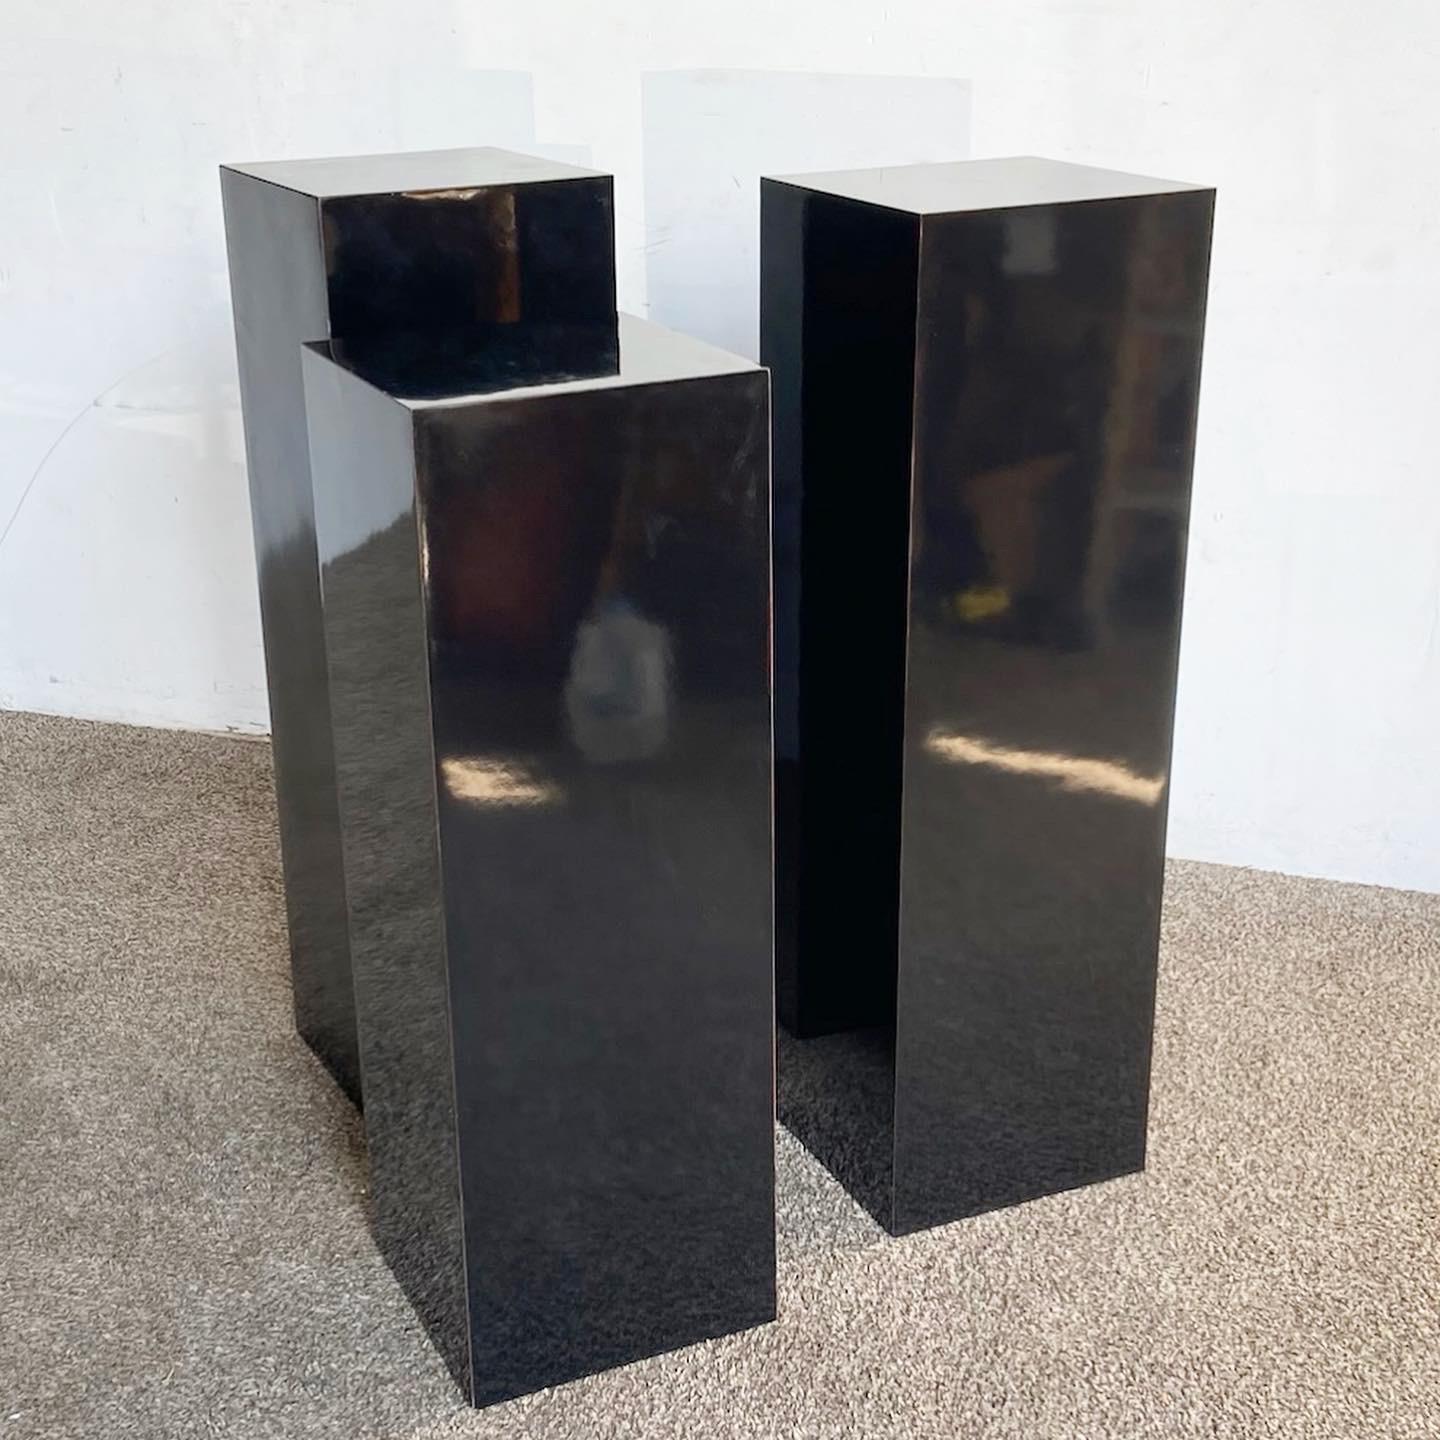 Elevate your contemporary space with this set of three Postmodern Black Lacquer Laminate Pedestals. Laminated in glossy black, they offer a sleek and versatile solution for displaying art or decorative items, capturing the minimalist spirit of